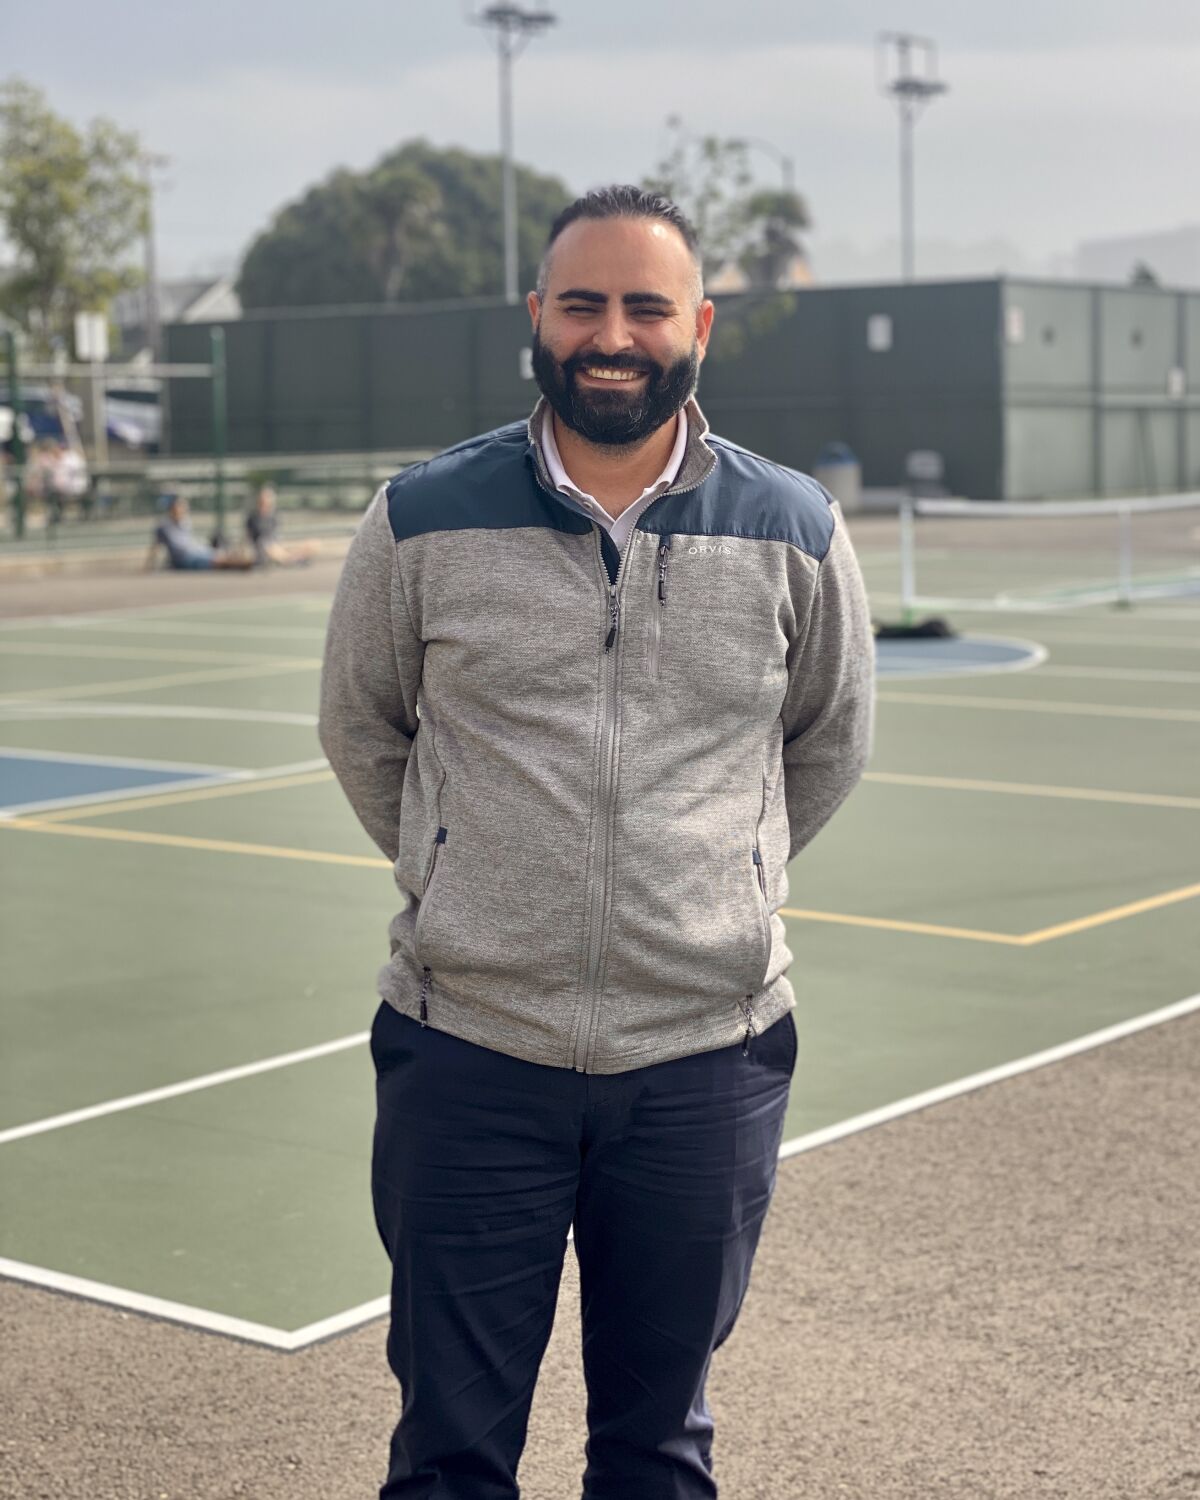 Nicholas Volpe, the new director of the La Jolla Recreation Center, started working in recreation in La Jolla as a teenager.